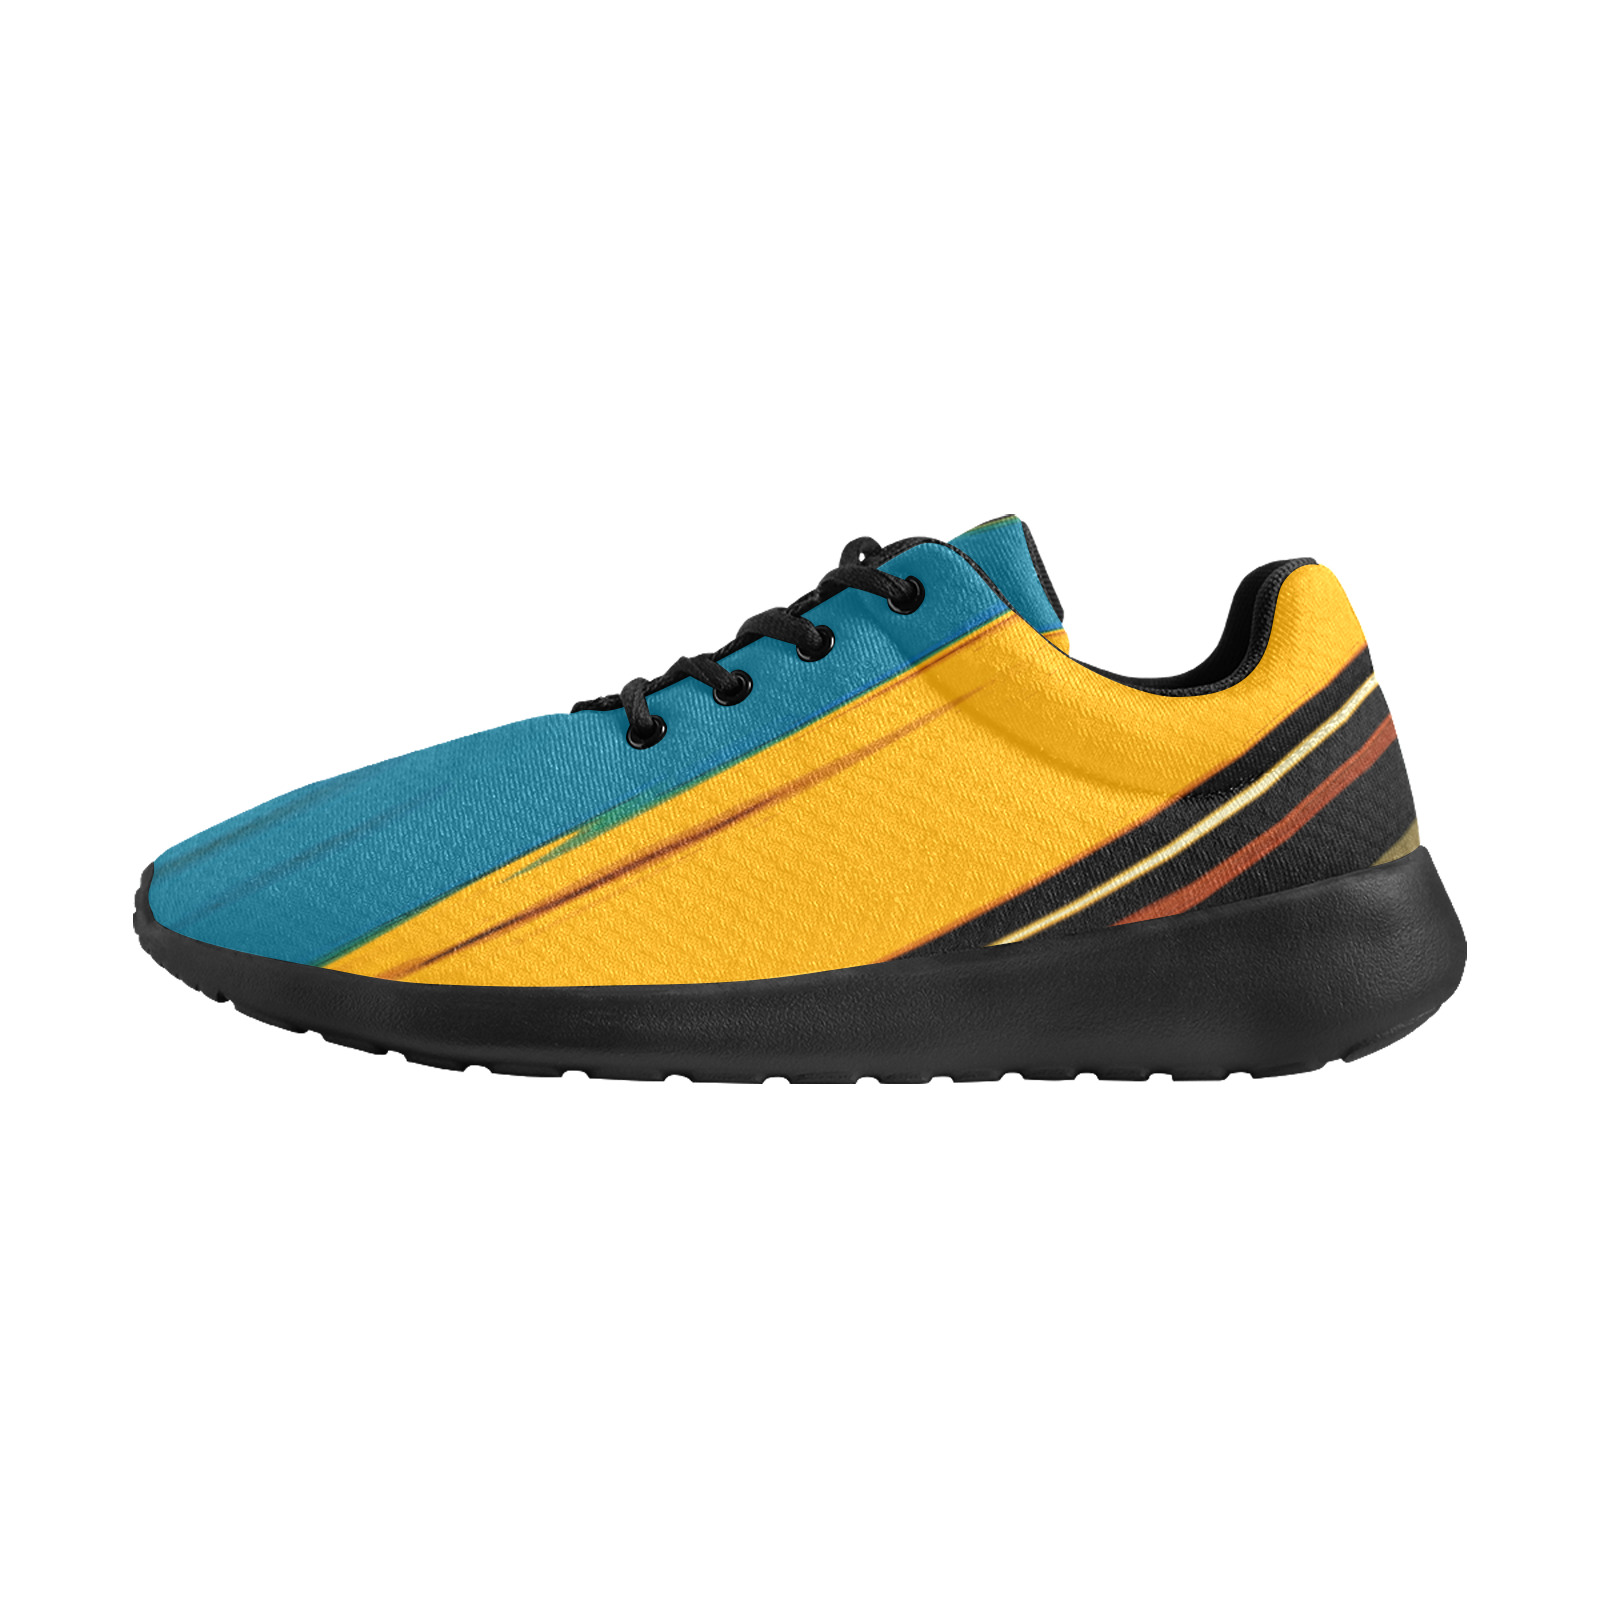 Black Turquoise And Orange Go! Abstract Art Women's Athletic Shoes (Model 0200)